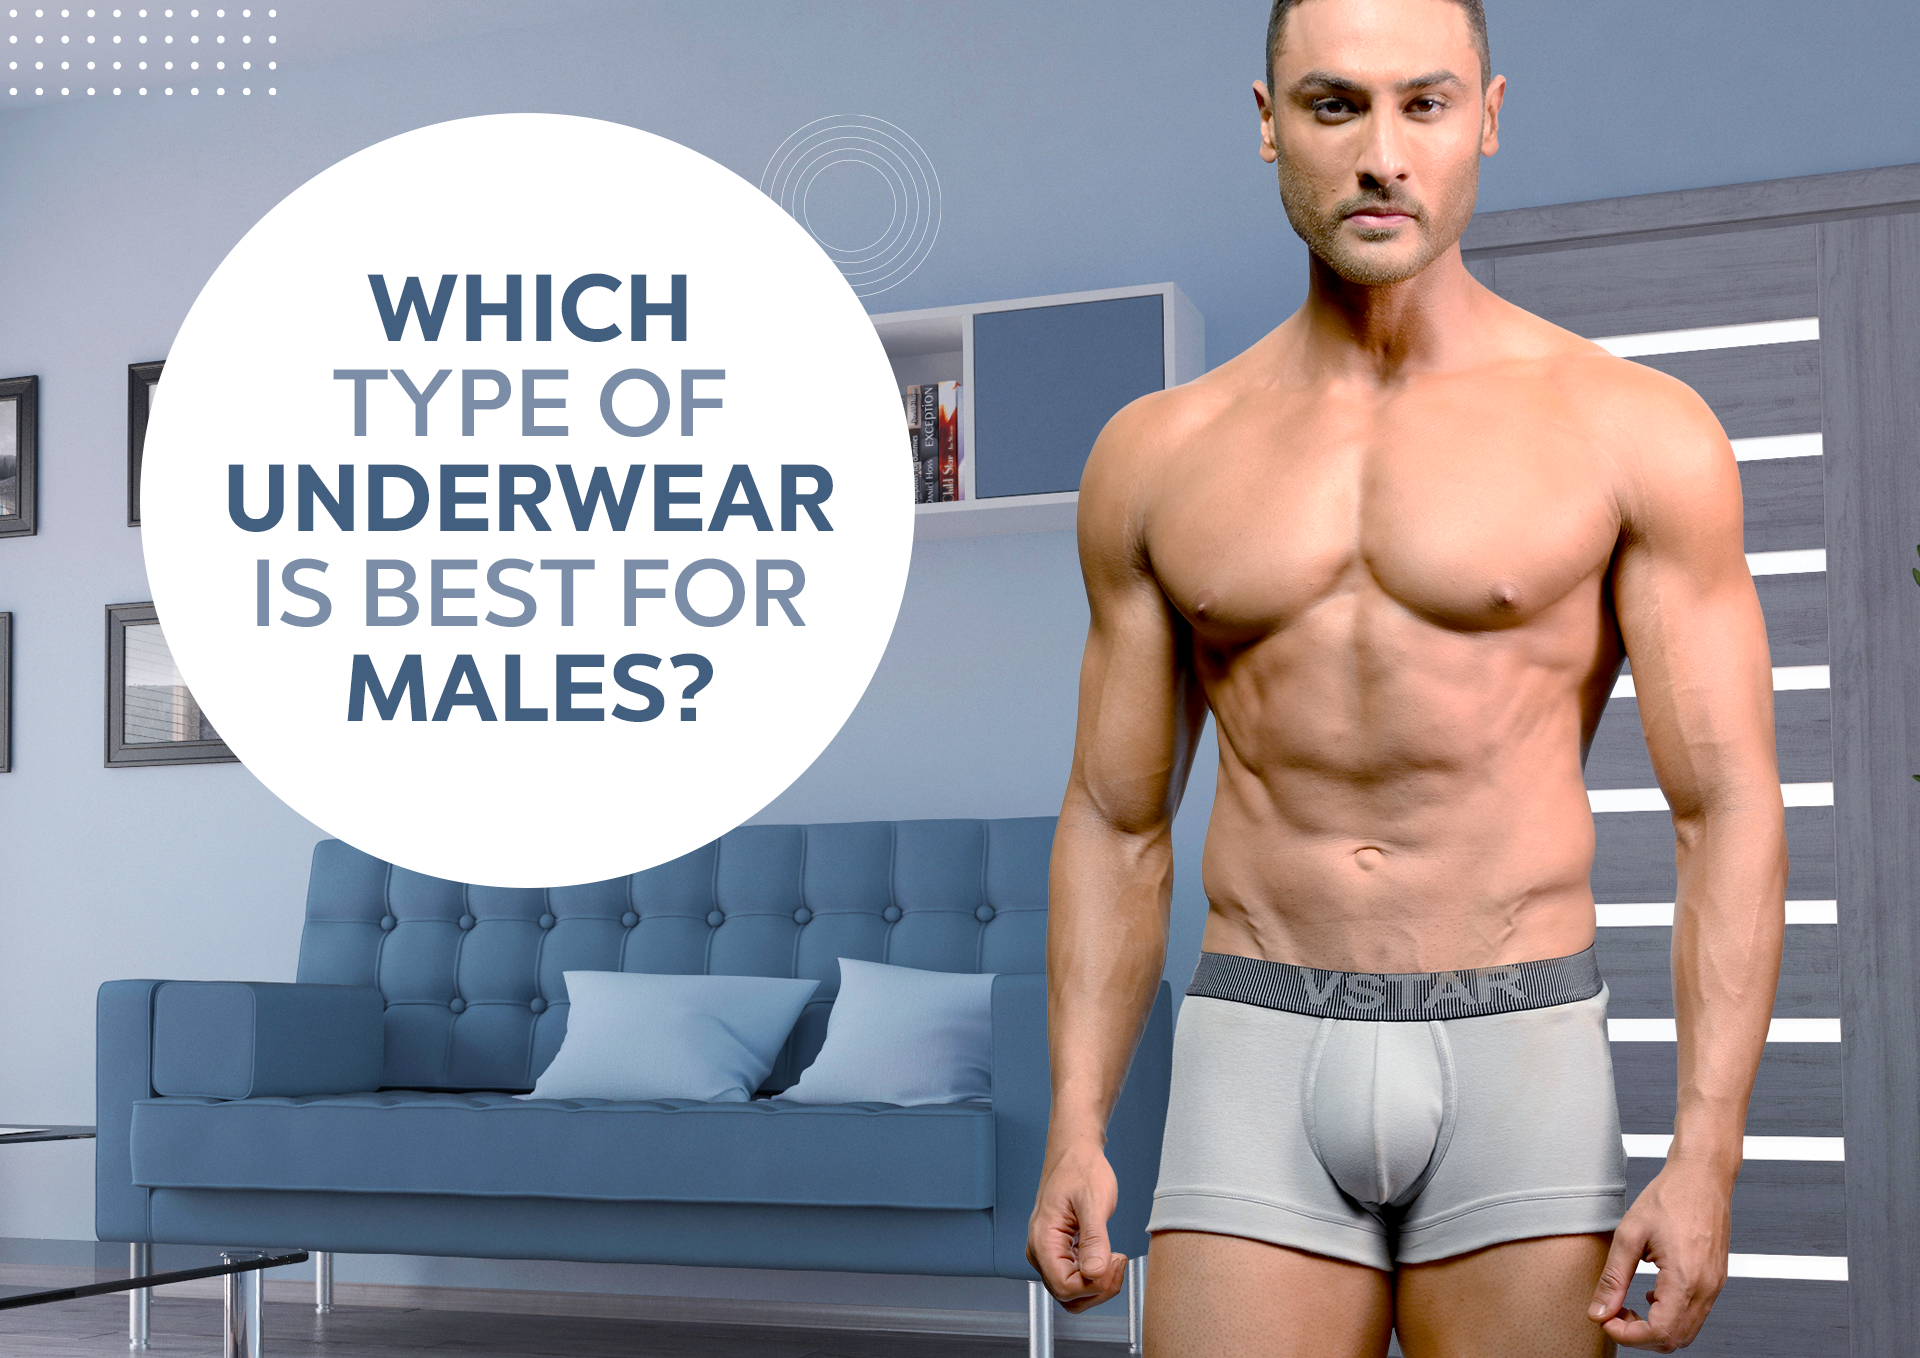 https://www.vstar.in/media//mageplaza/blog/post/w/h/which-type-of-underwear-is-best-for-males_1.png